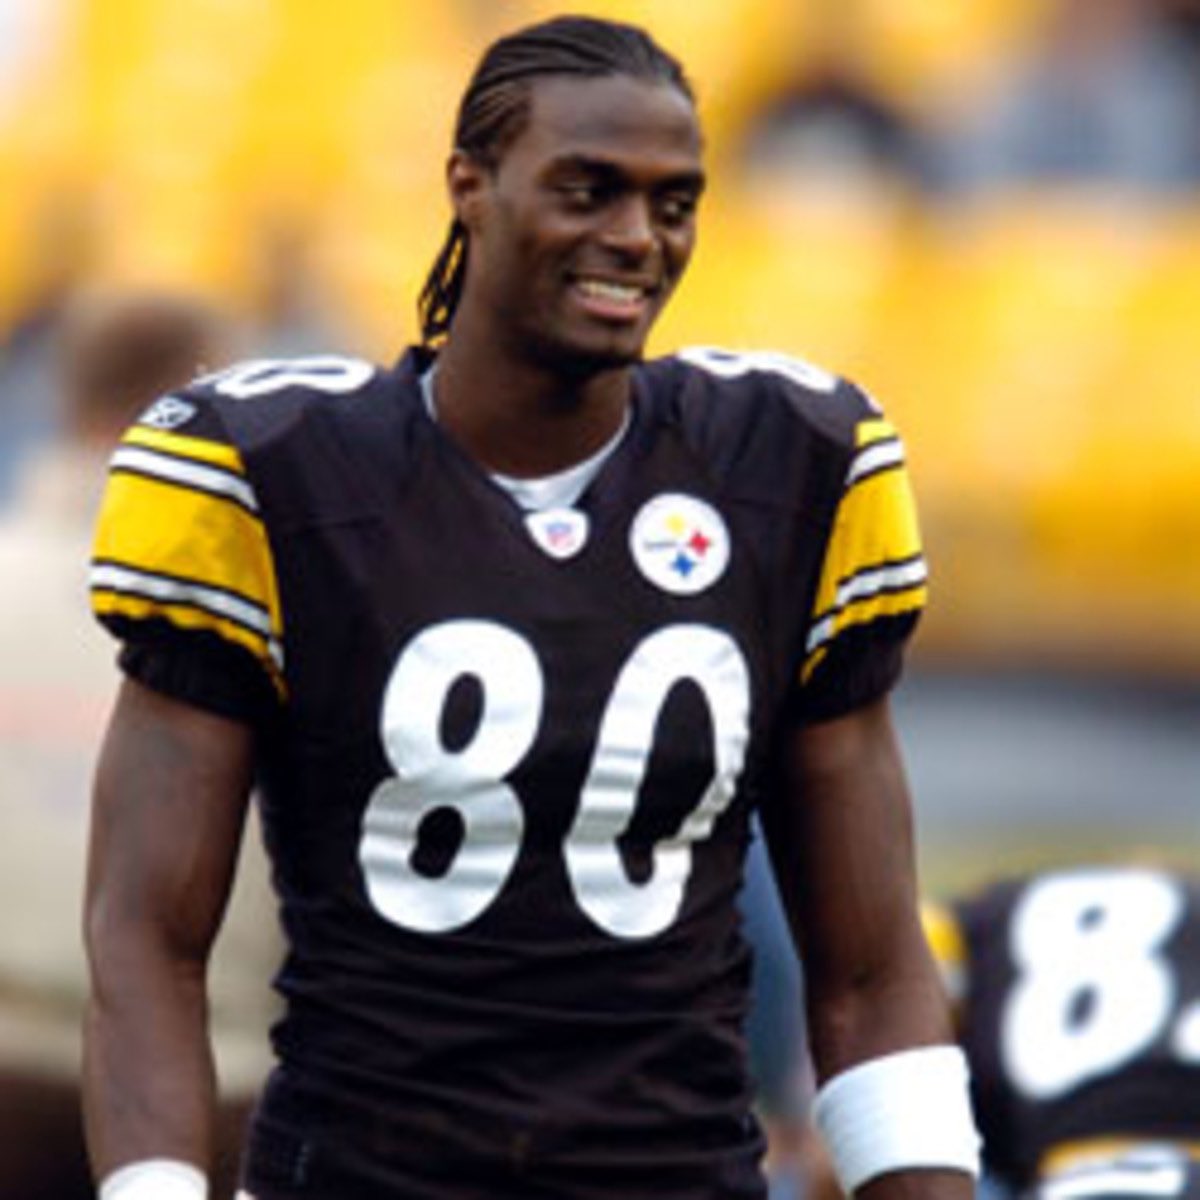 Plaxico Burress, an American football player was infamously sentenced to two years in prison following an incident where he shot himself in the leg trying to stop his glock sliding down his sweatpants.